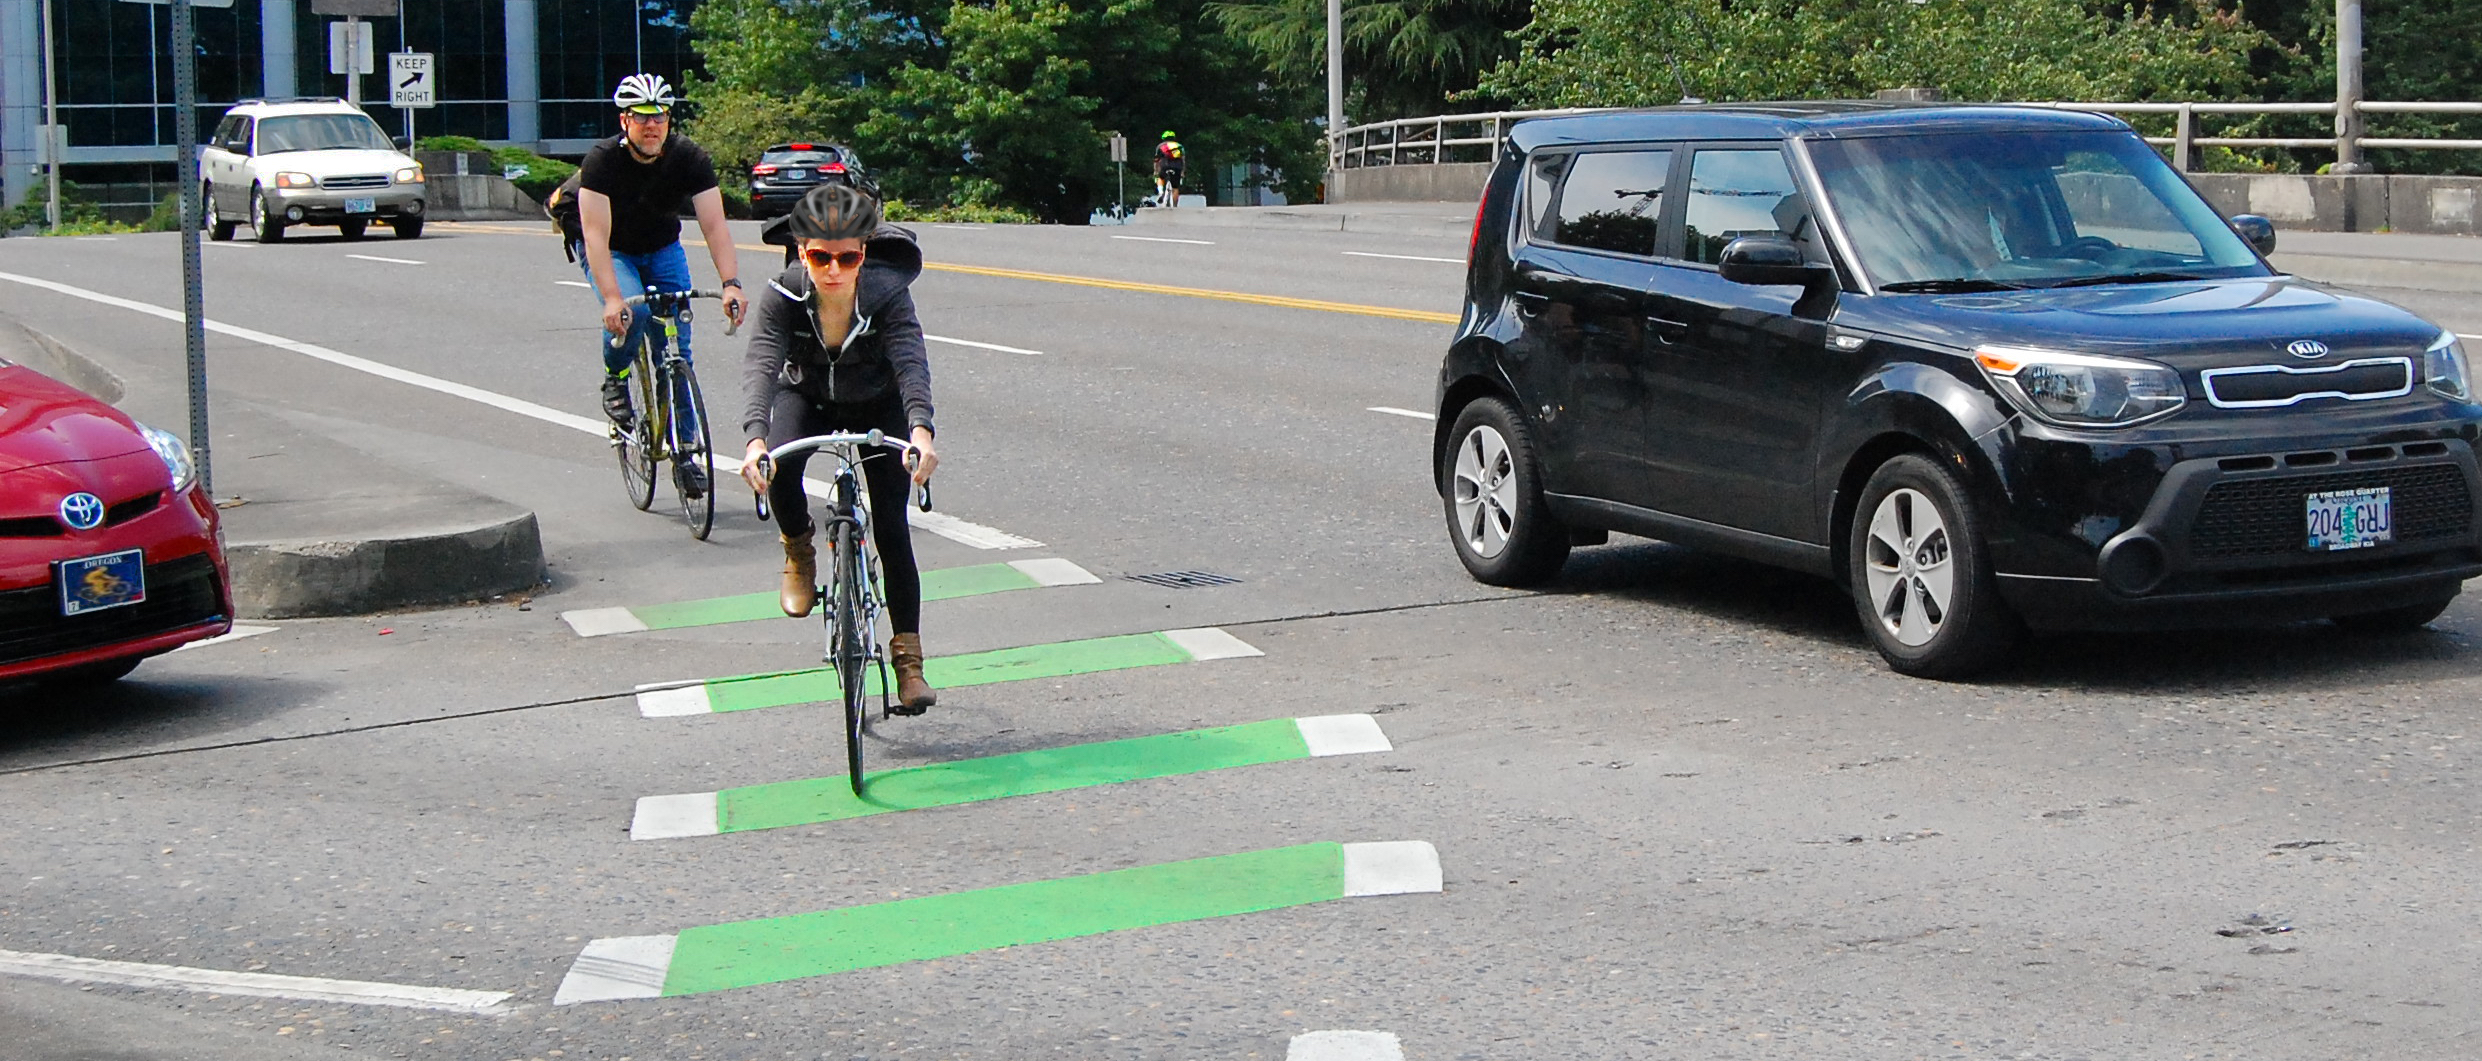 Bicyclists ride in a painted bike lane, defined by green stripes